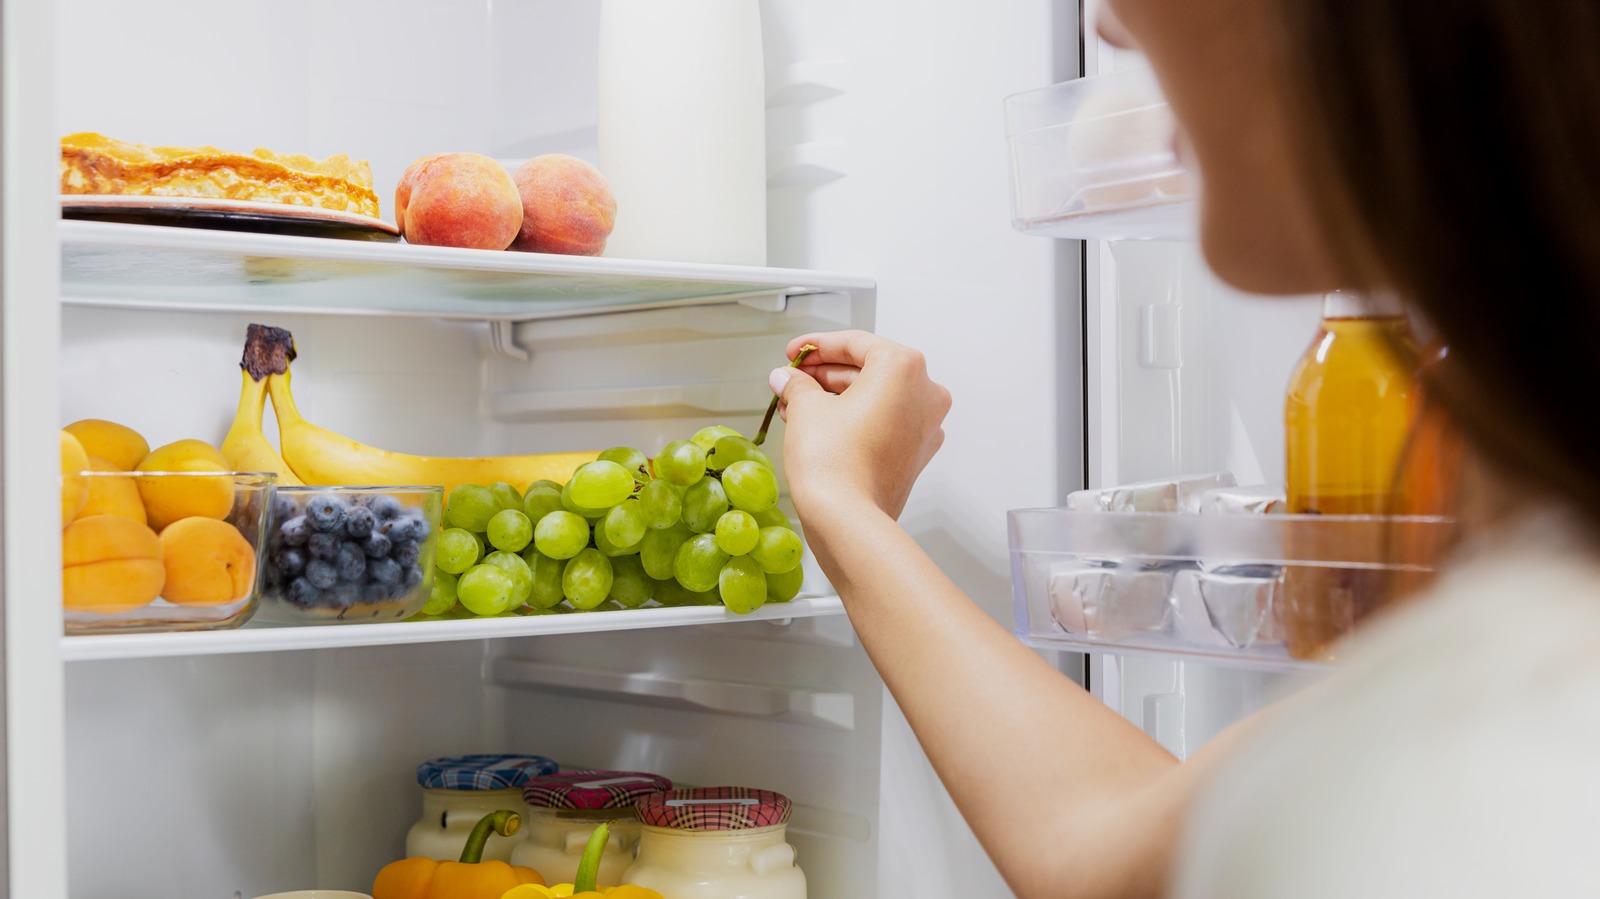 https://www.housedigest.com/img/gallery/22-unique-organization-products-to-keep-your-refrigerator-under-control/l-intro-1685383419.jpg